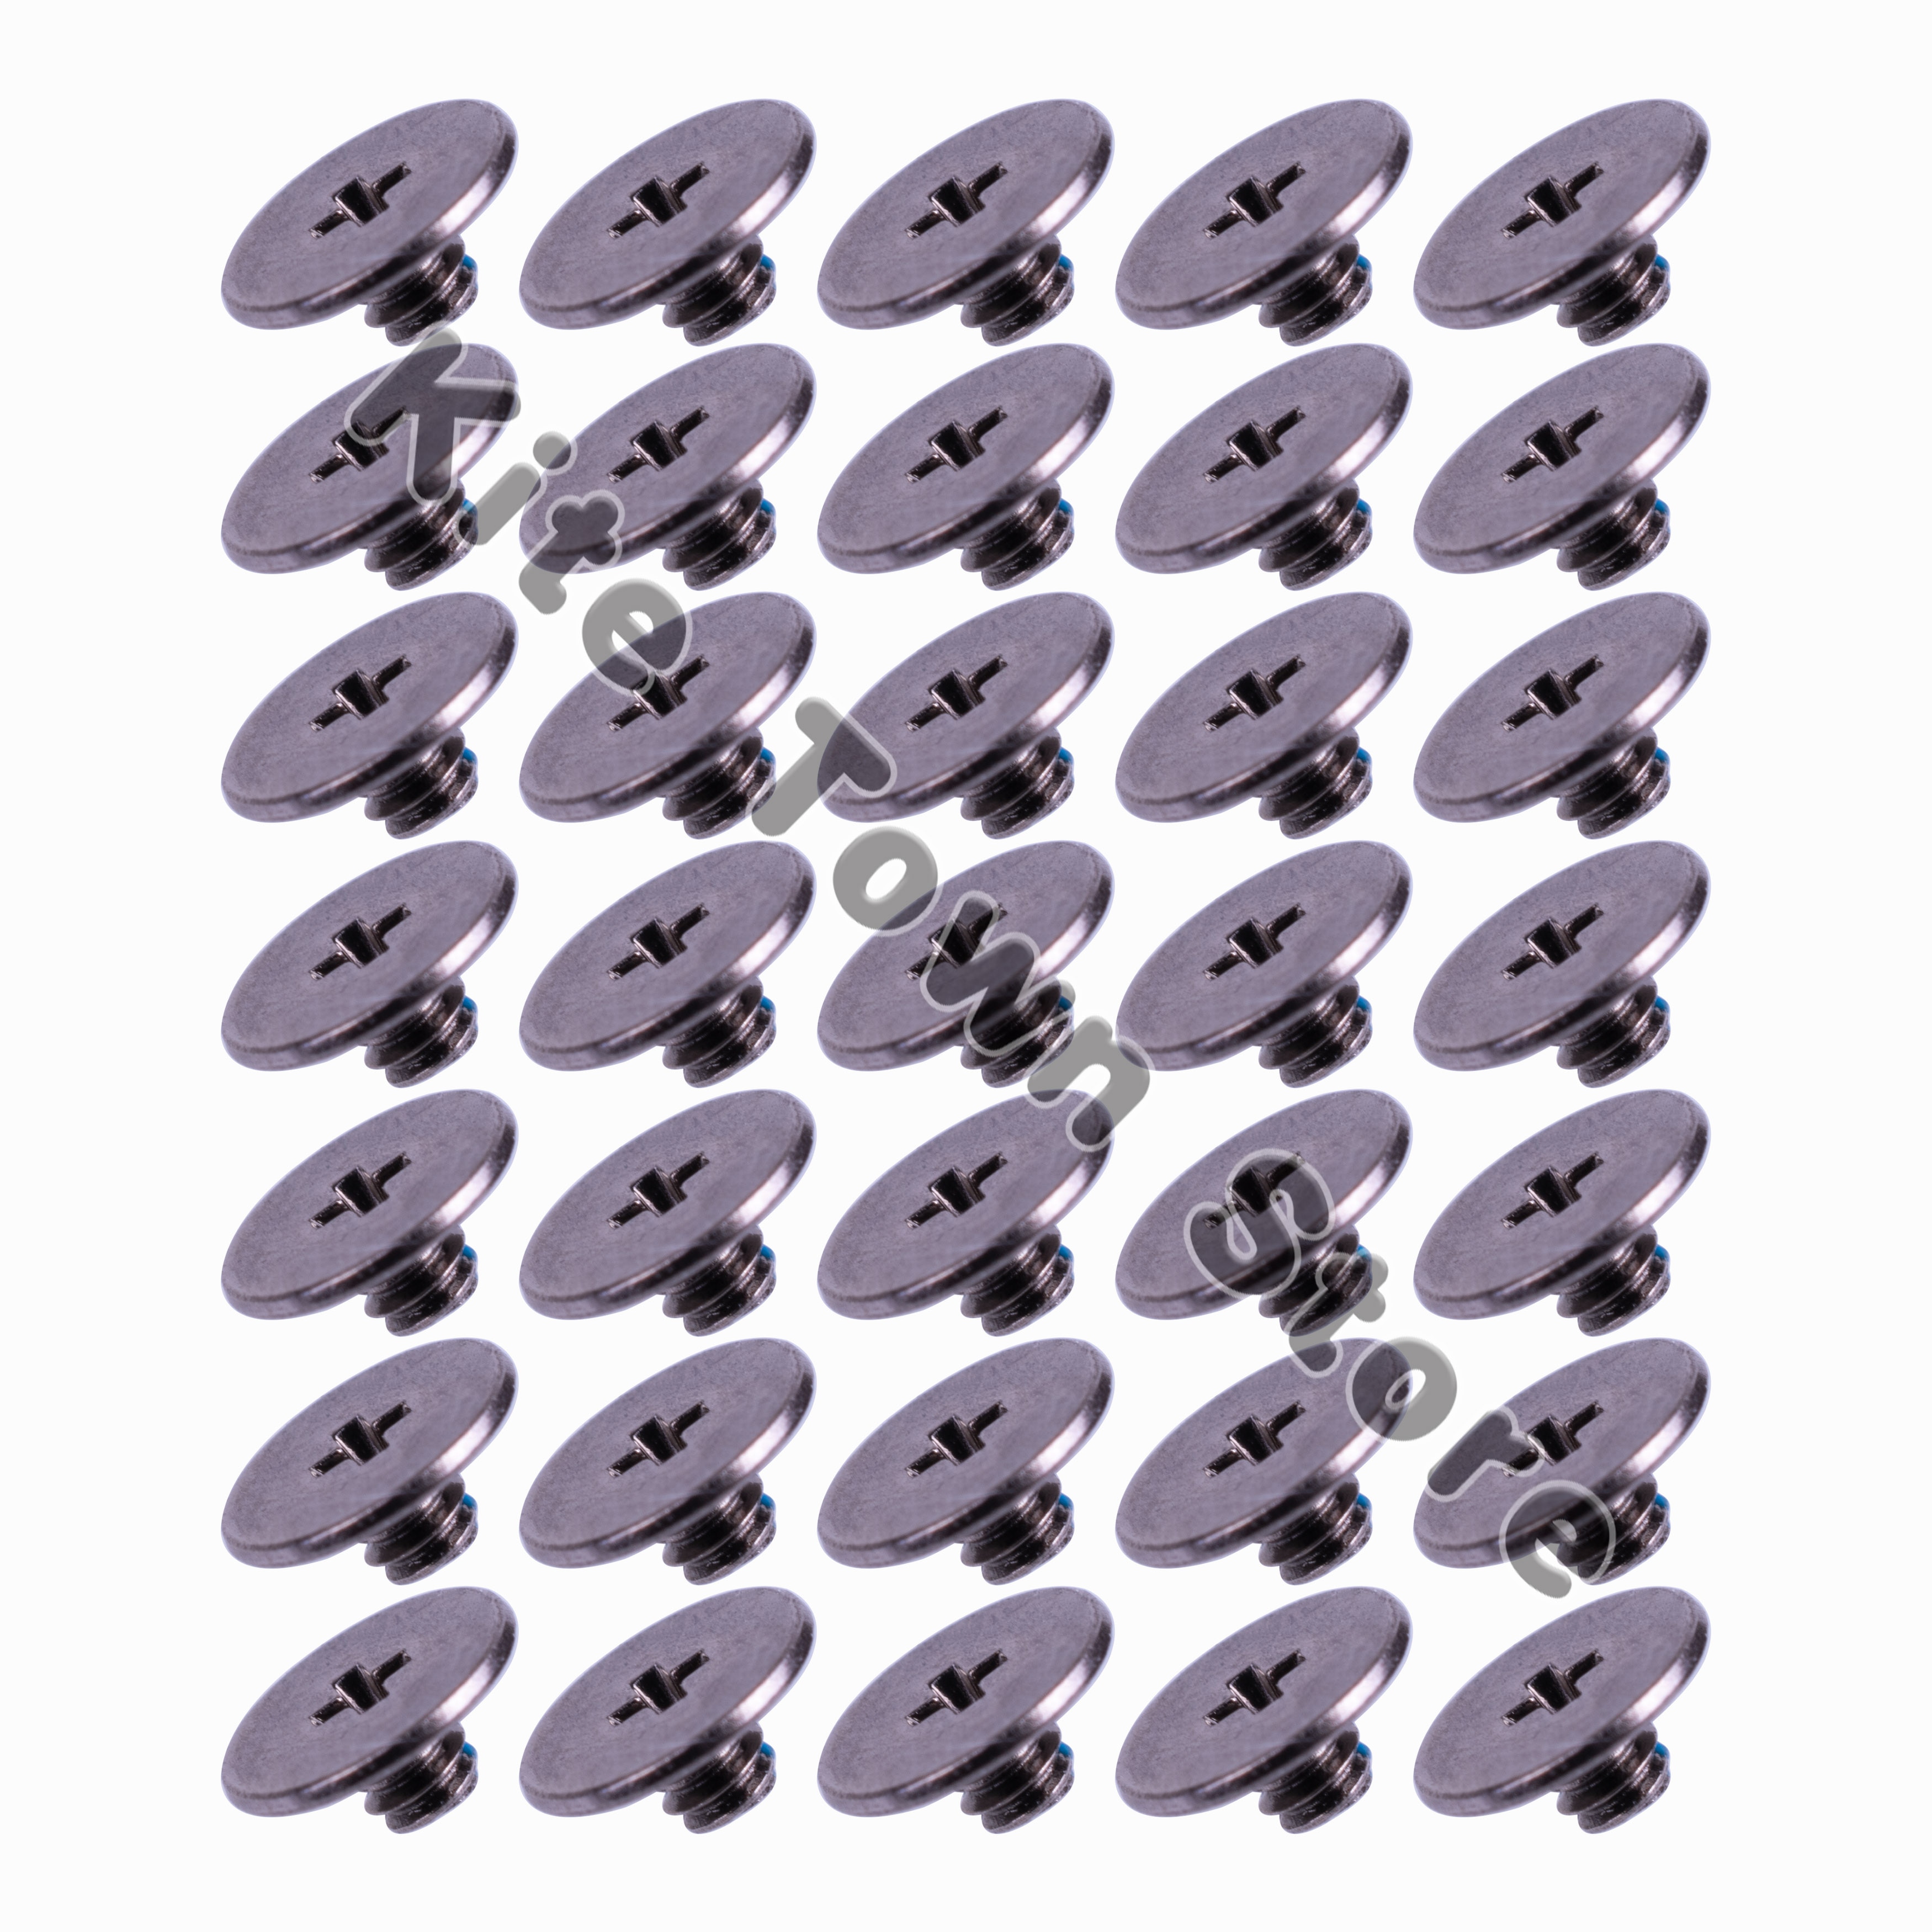 35 pcs Keyboard Schroef voor Dell XPS 13 9343 9350 9360 XPS 15 9550 9560 M5510